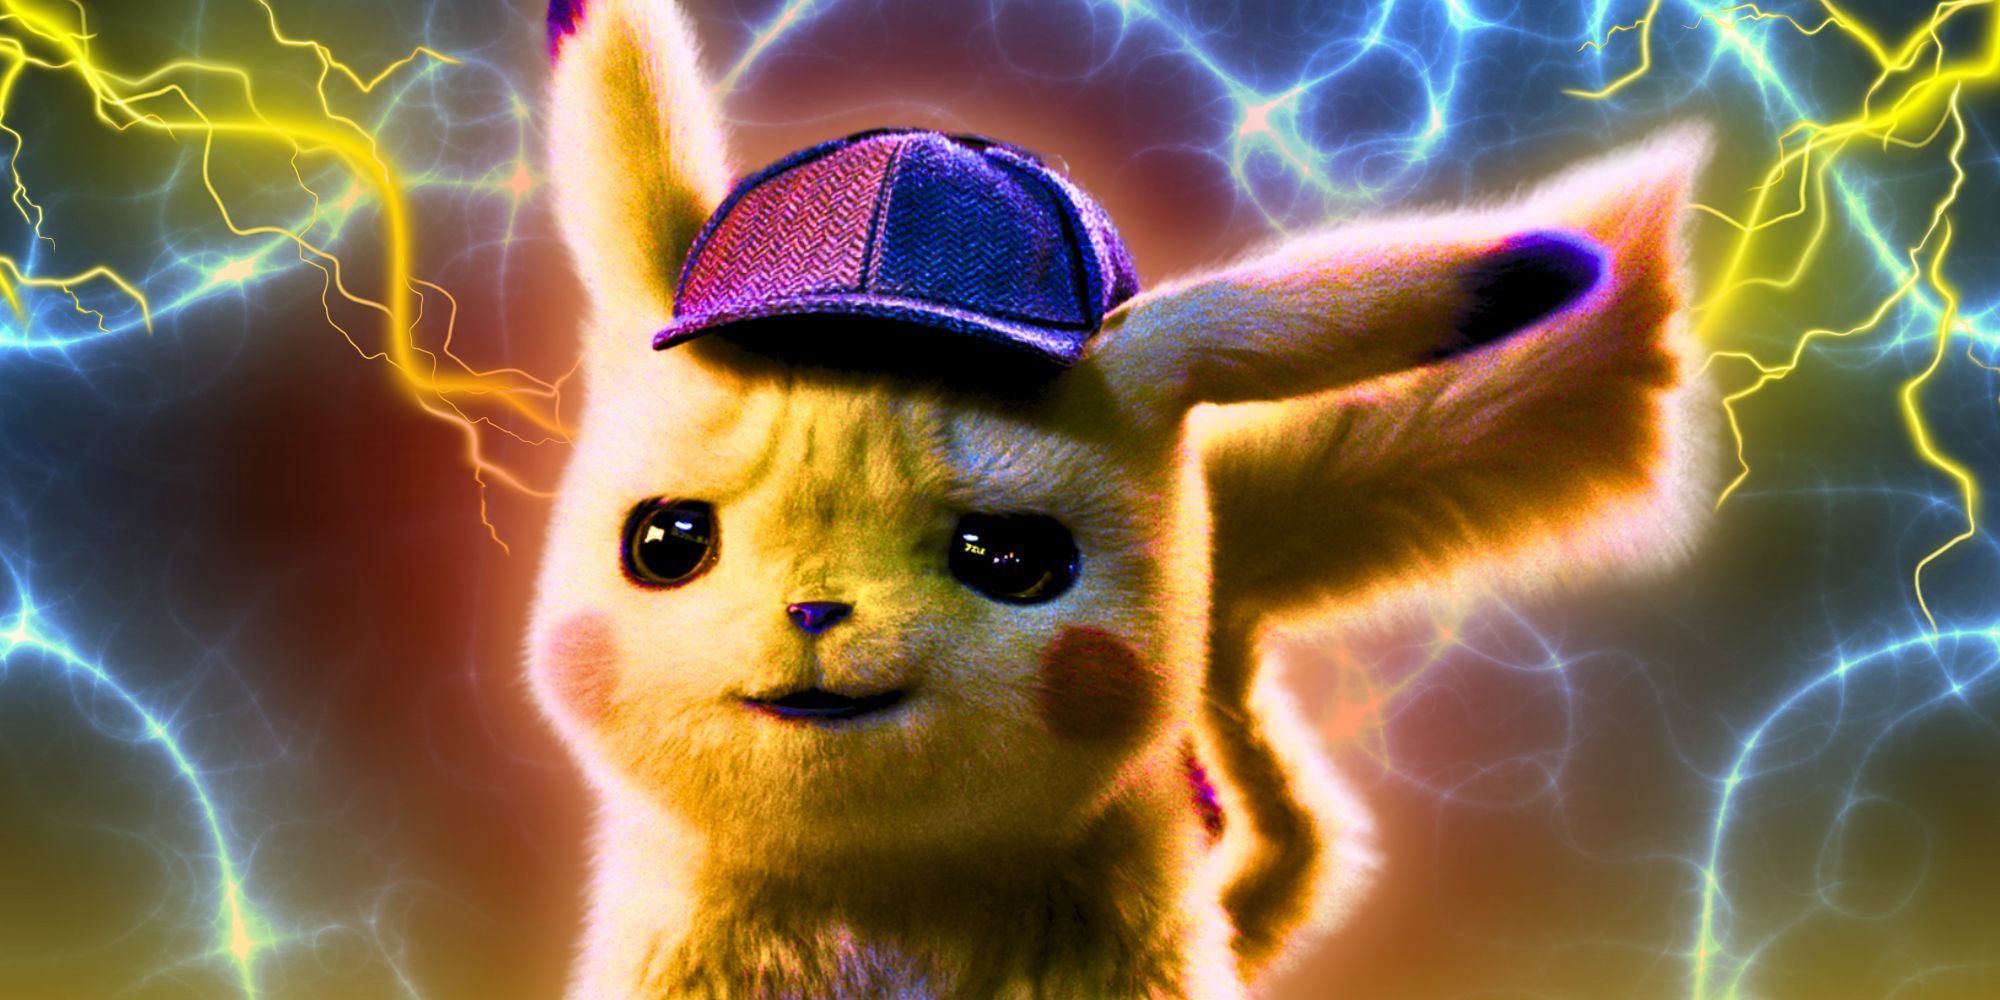 A custom image of the Pikachu from Detective Pikachu